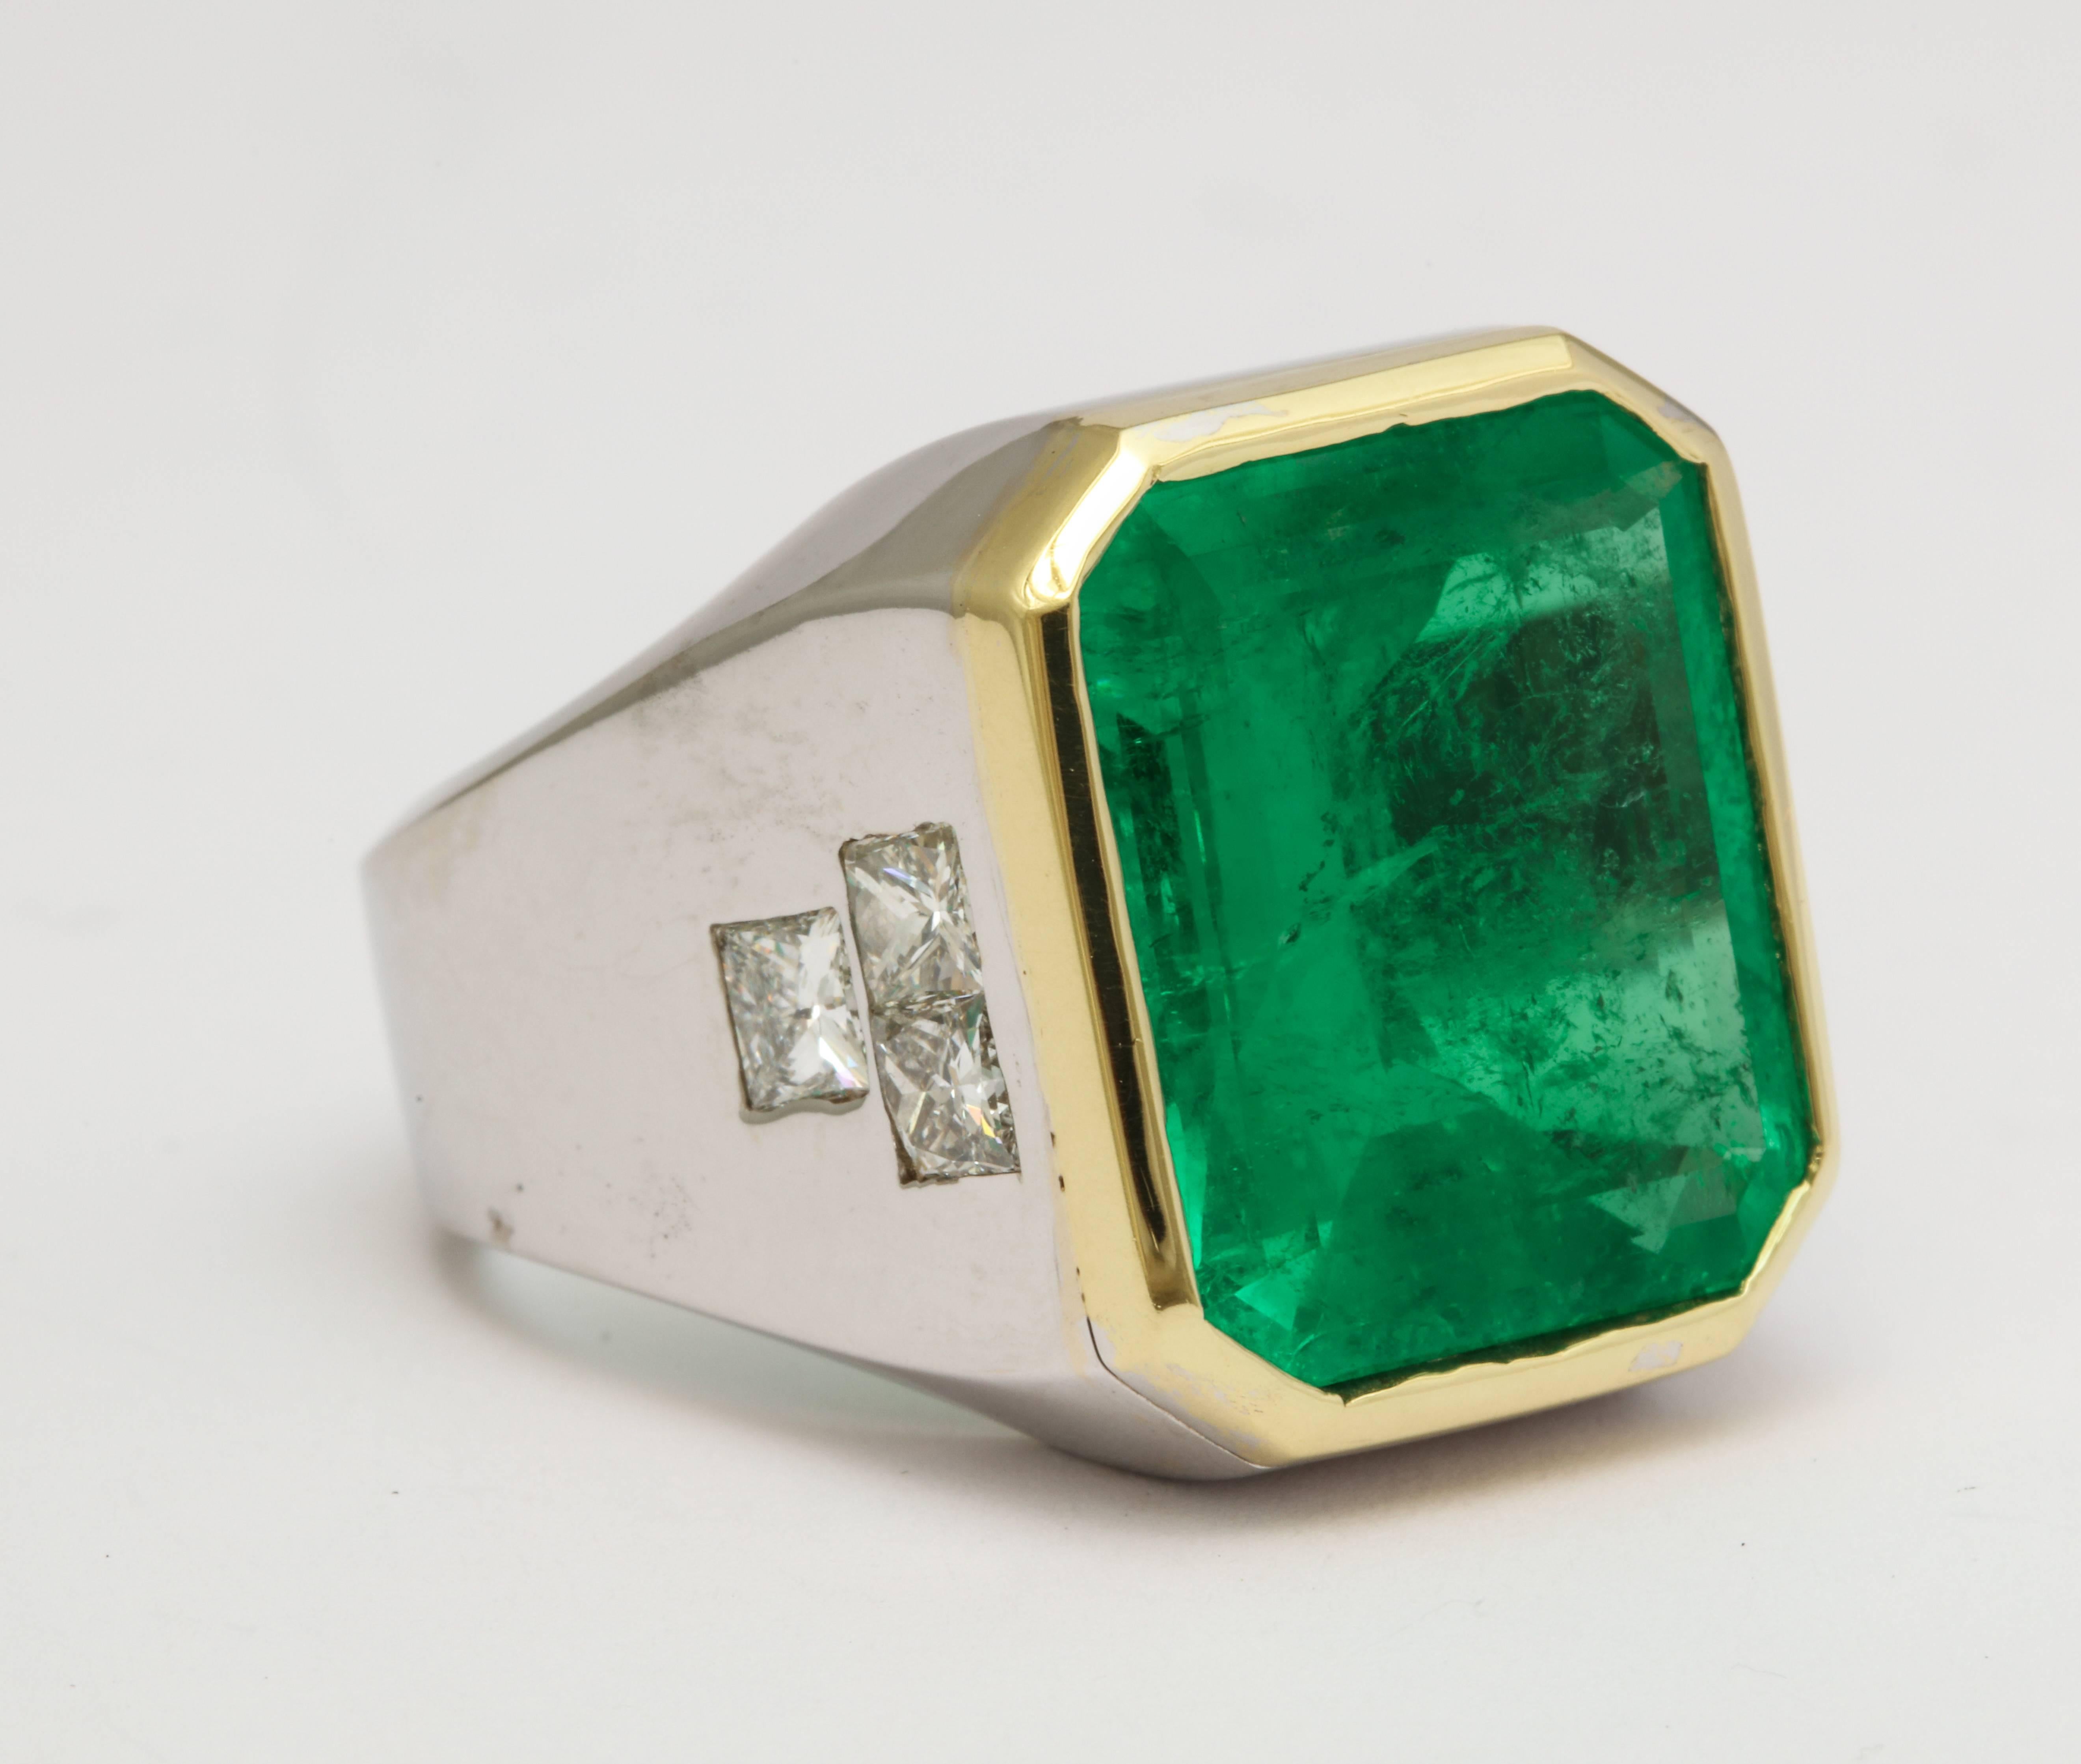 A very fine 13.34 carat Colombian Emerald Gentleman's Ring

Emerald has AGL Certificate stating the emerald is Colombian, with Minor oil.

1.72 ct of diamonds, 18 karat gold

The stone weights are engraved on the inside of the ring

